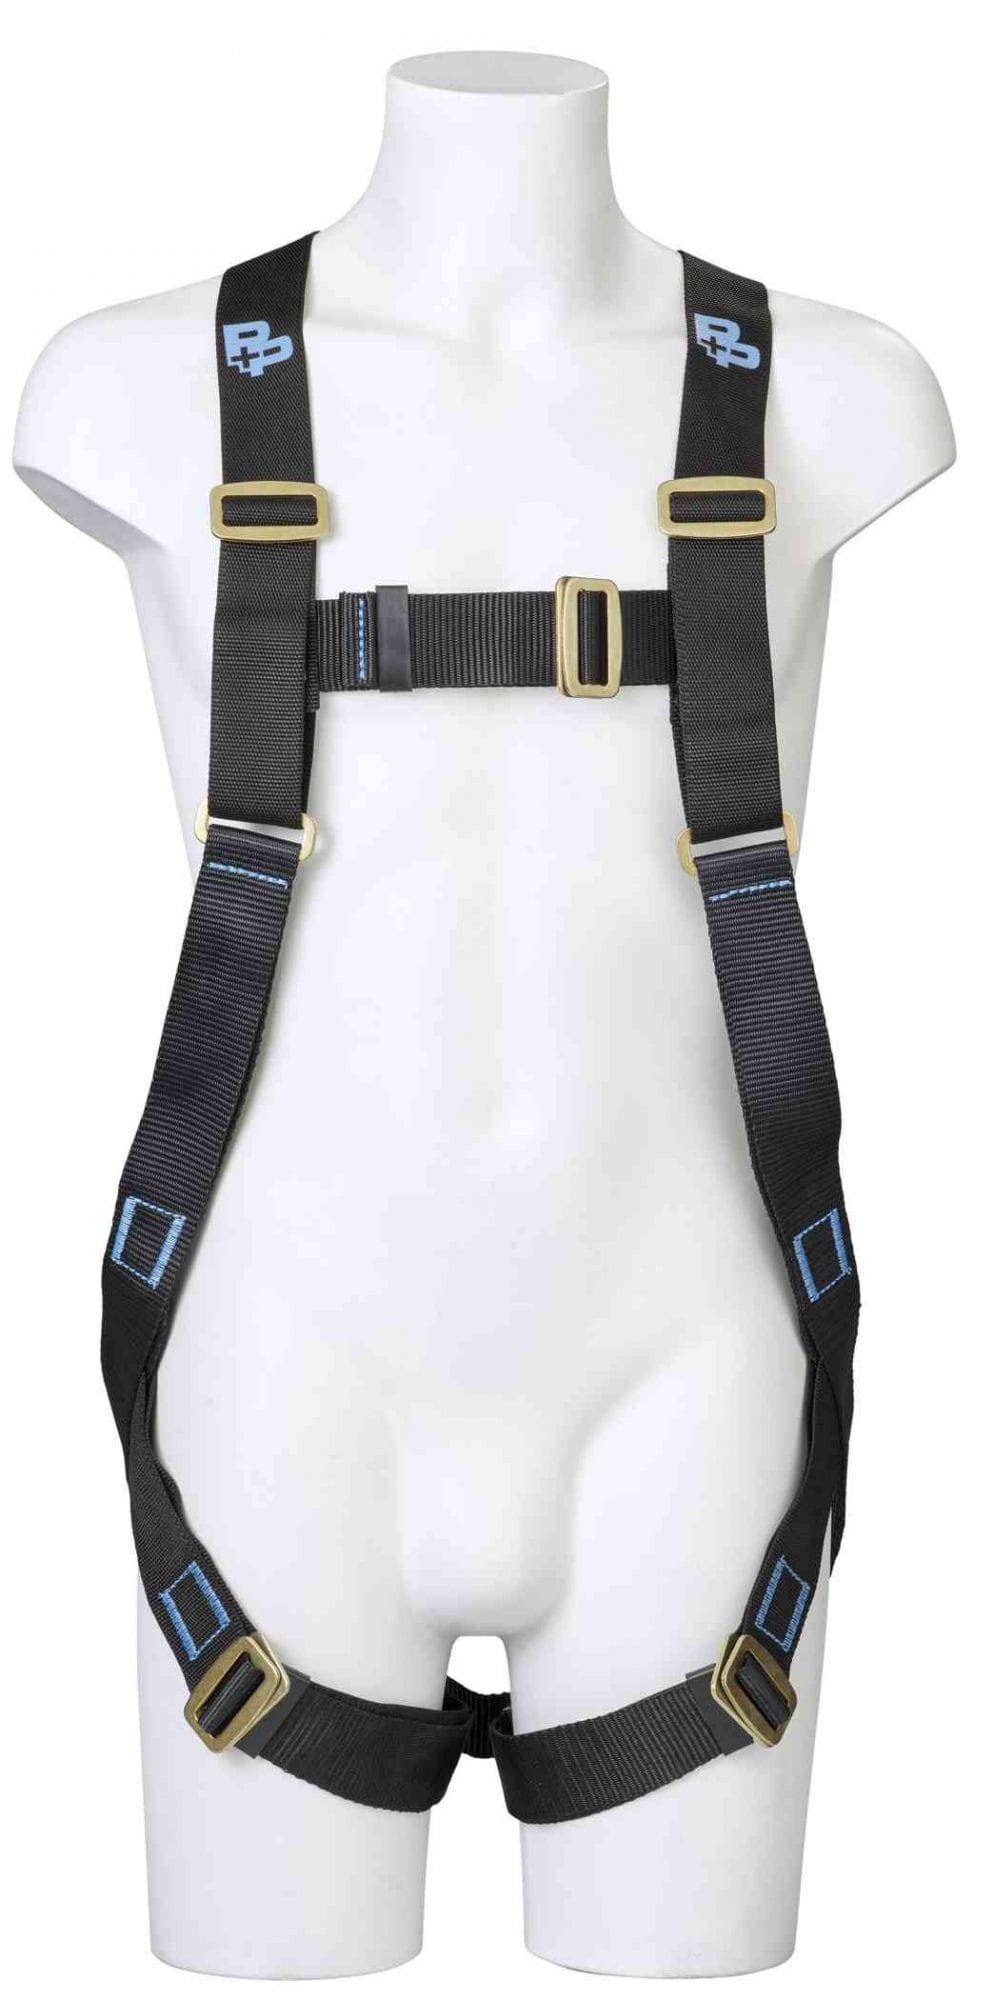 P+P Safety Basic Fall Arrest Harness 90046MK4 - SecureHeights